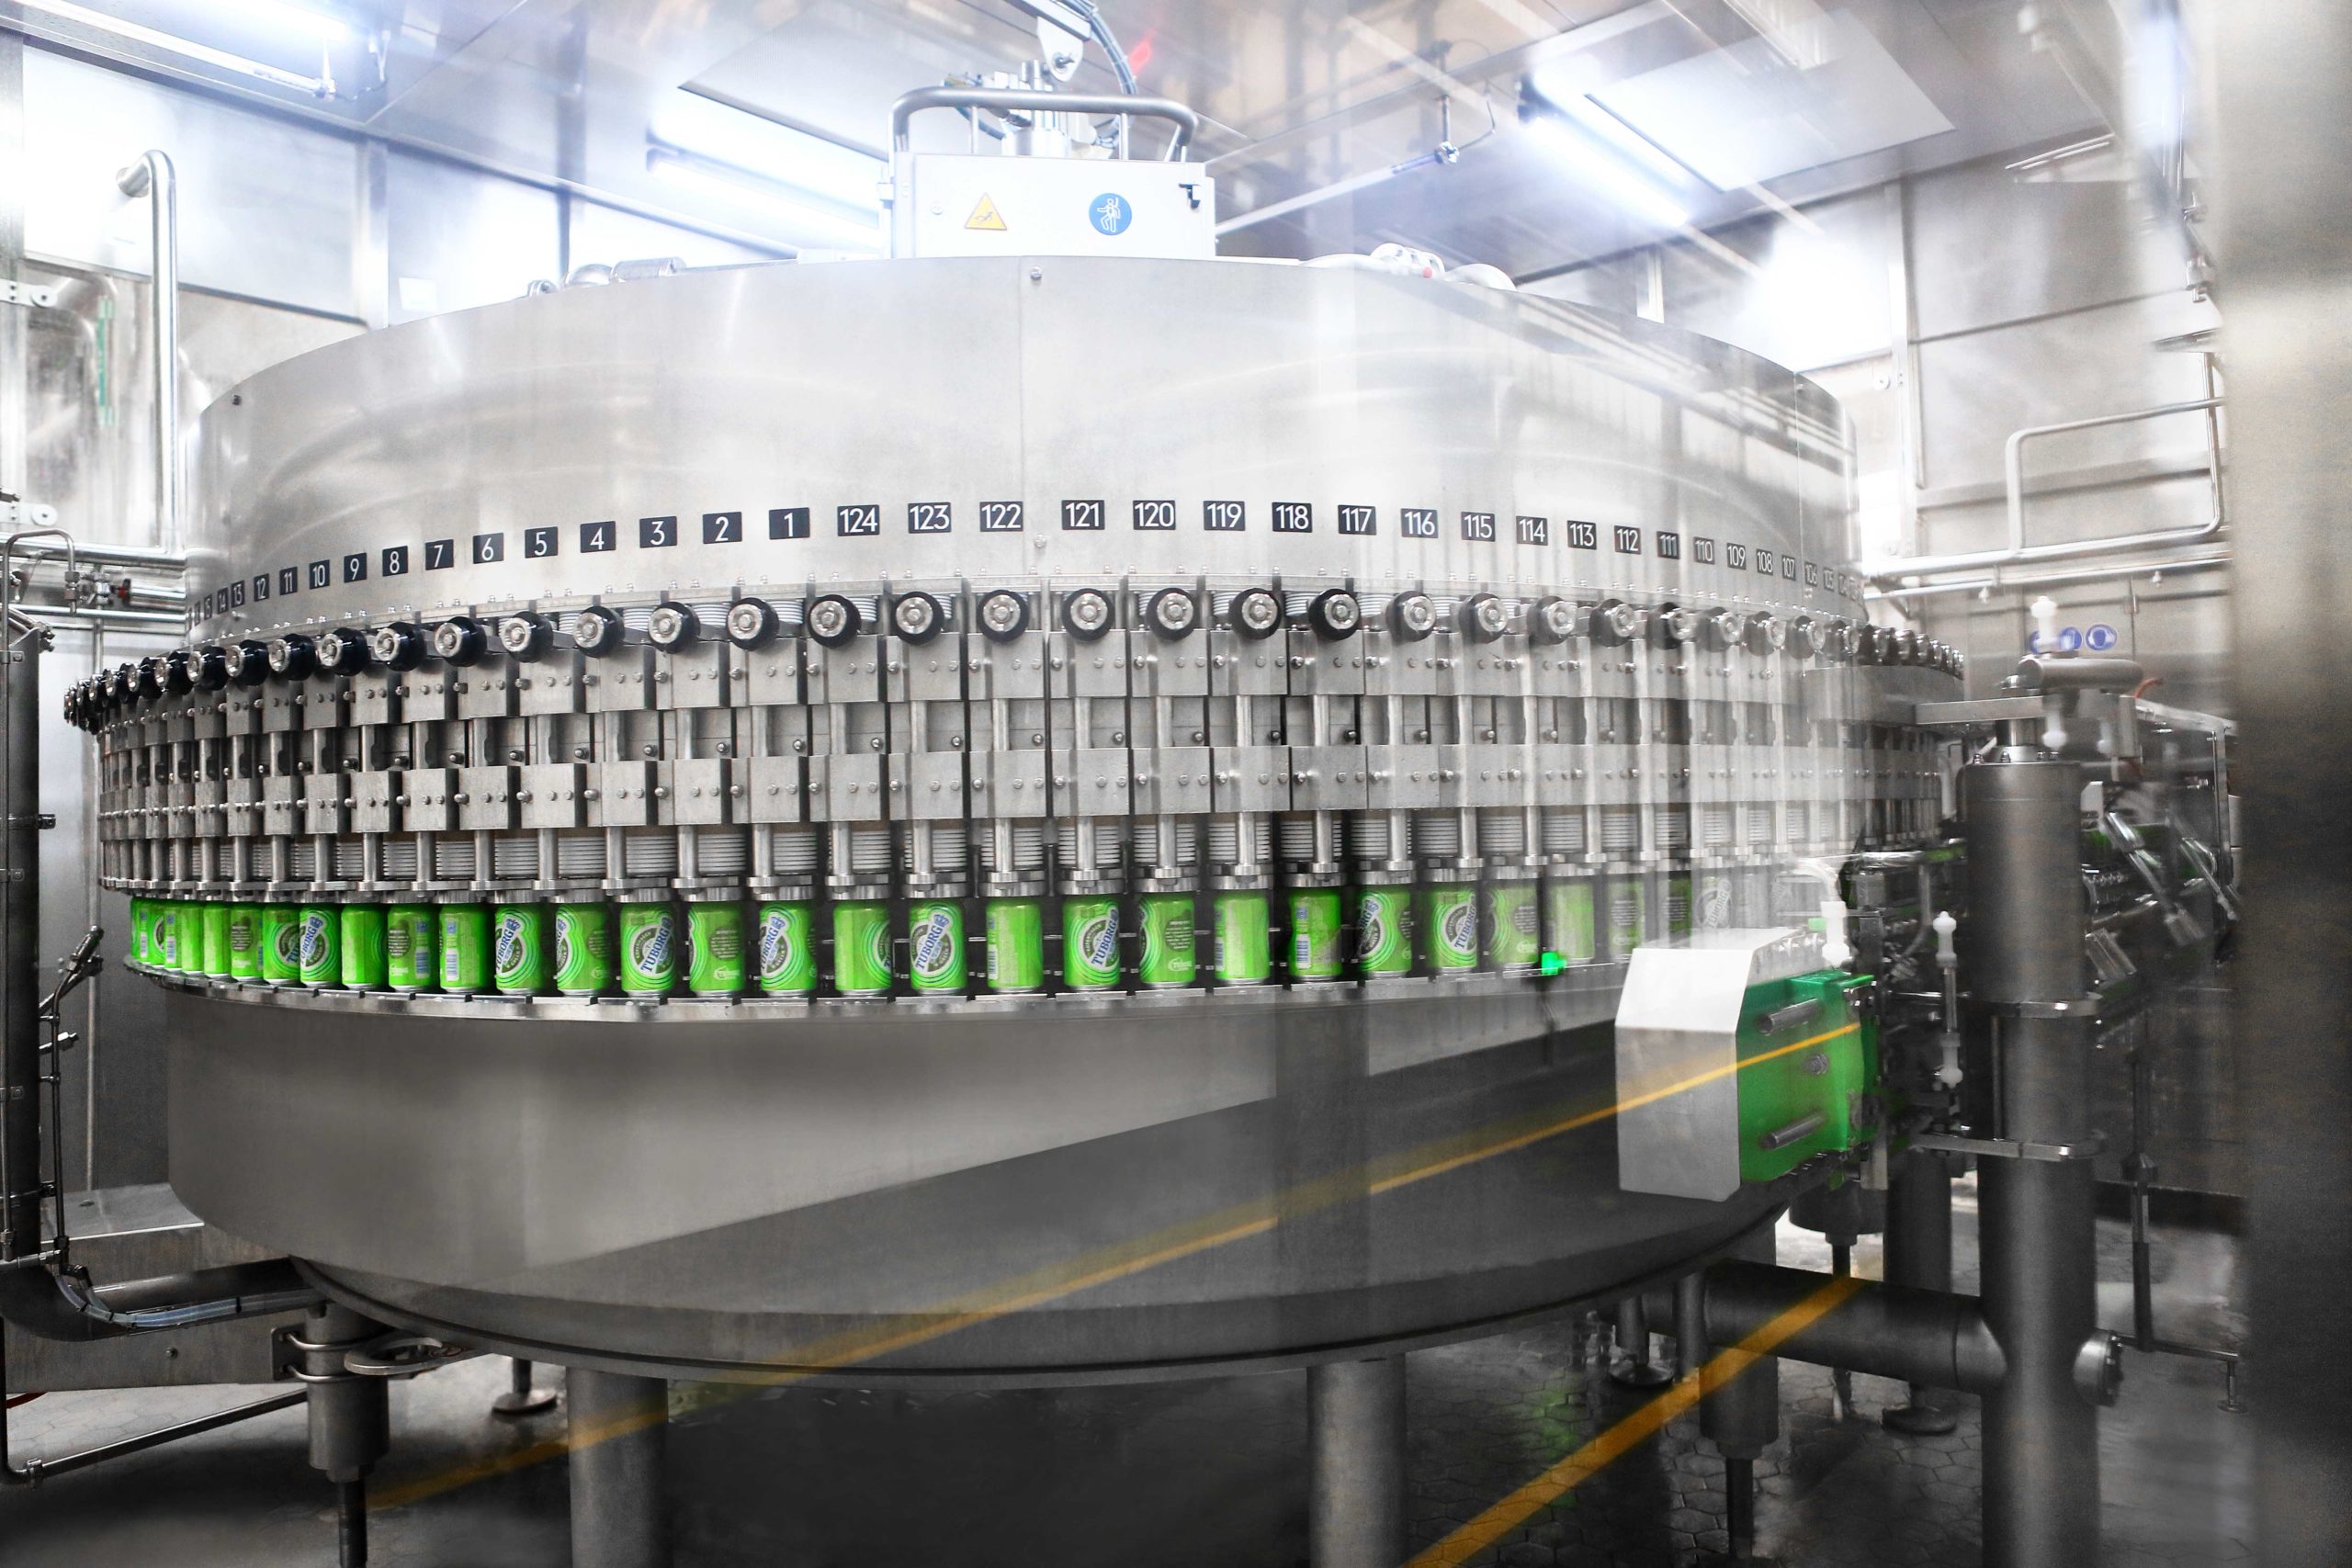 TurboFil Packaging Machines - Filling and Assembly Machines